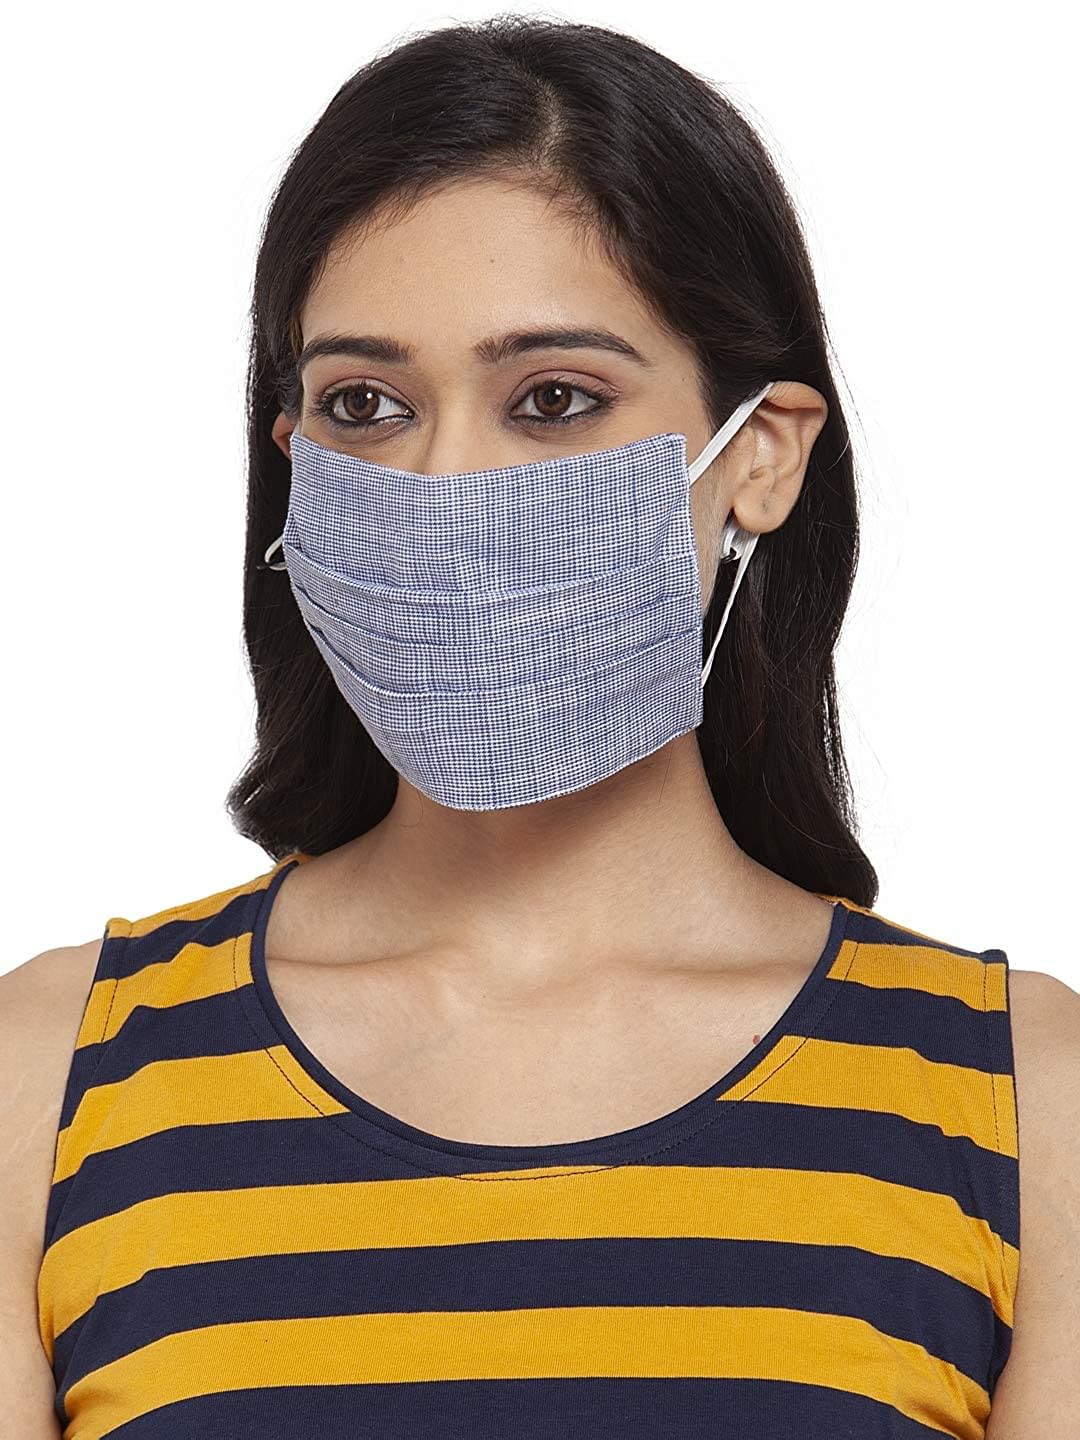 Unisex 3-Layer Adjustable & Stretchable Protective Mask with Ear Loops - Size L - Set of 5